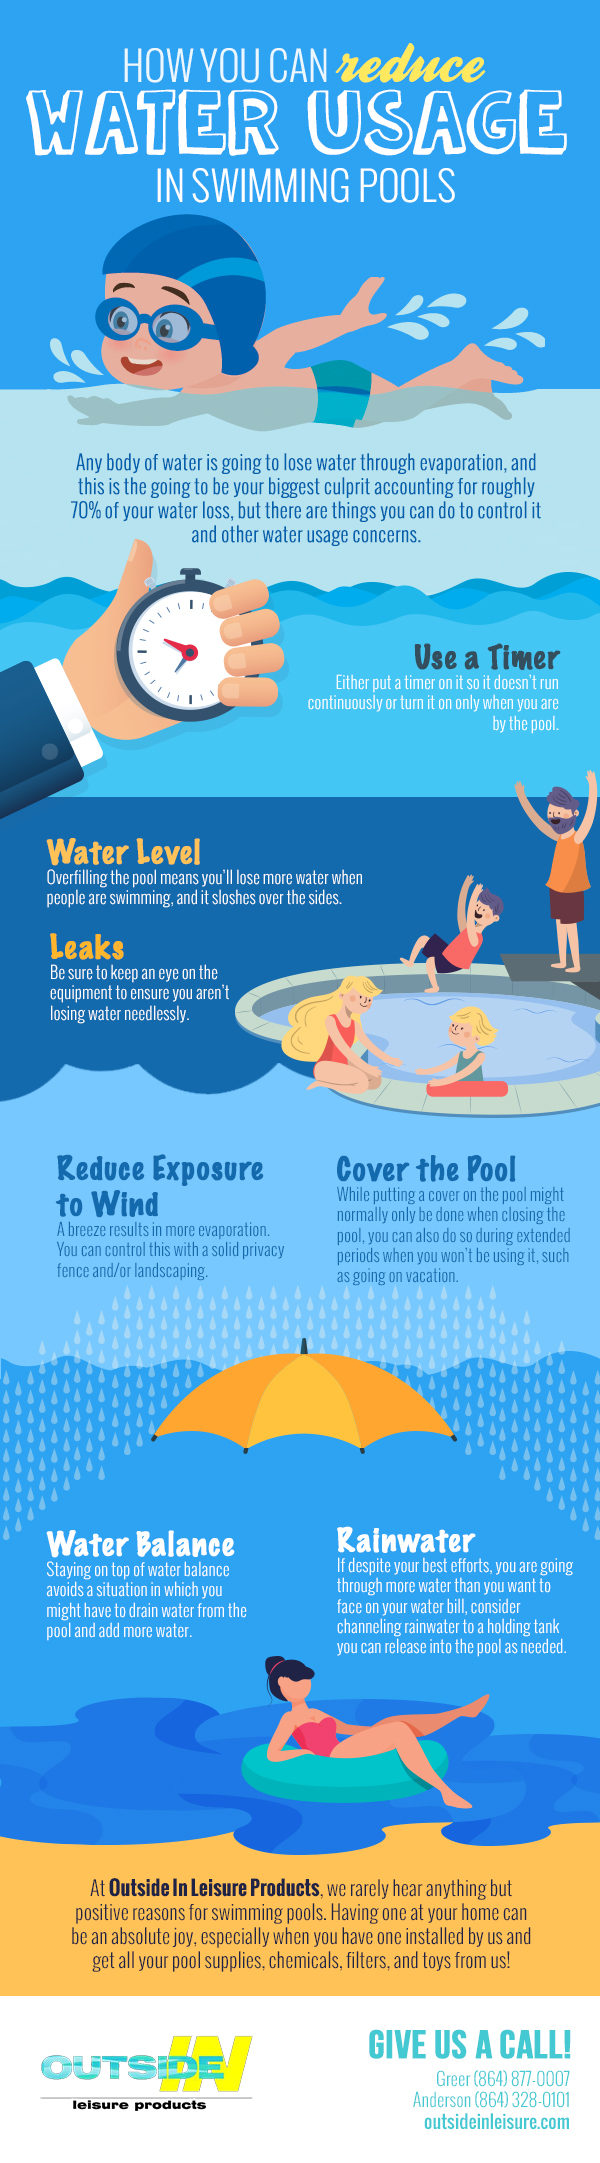 tips on how to reduce water usage in your swimming pools